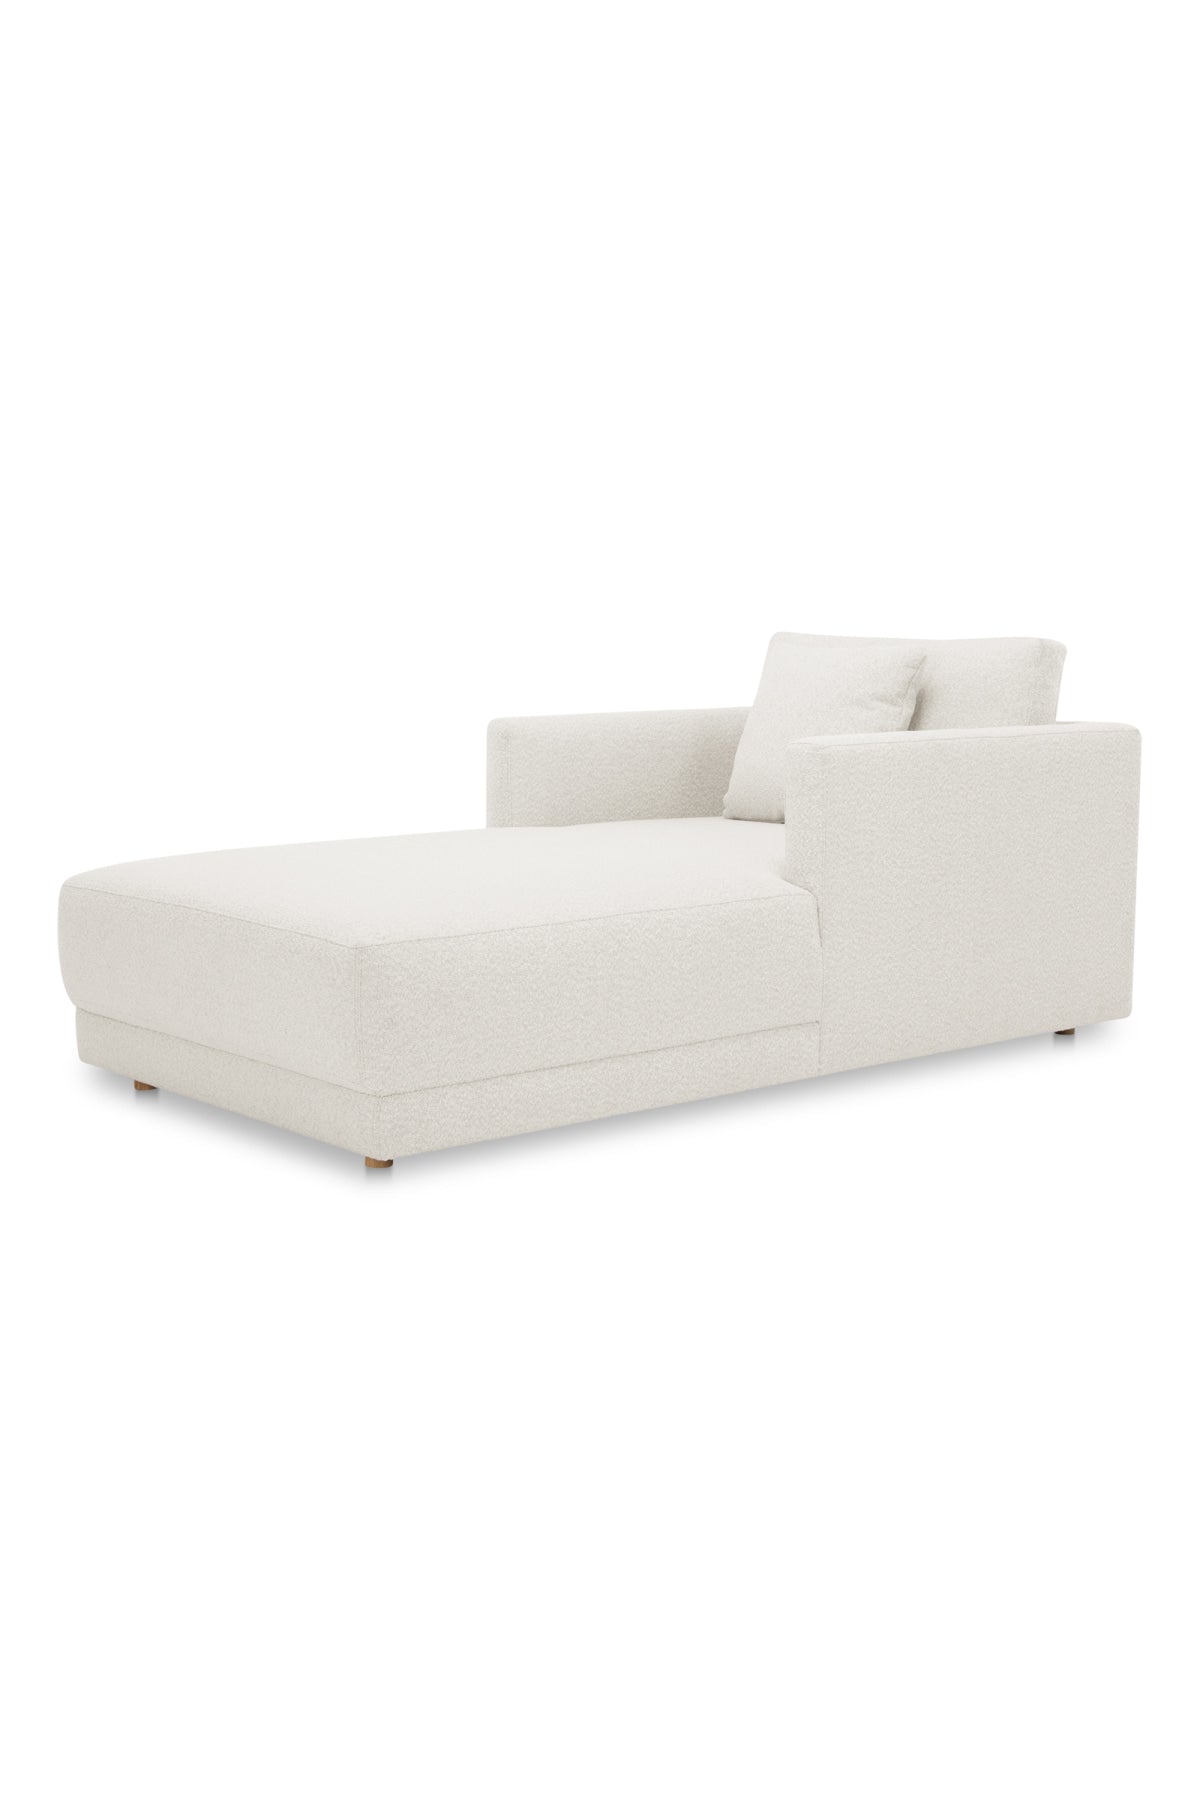 Stacatto Chaise